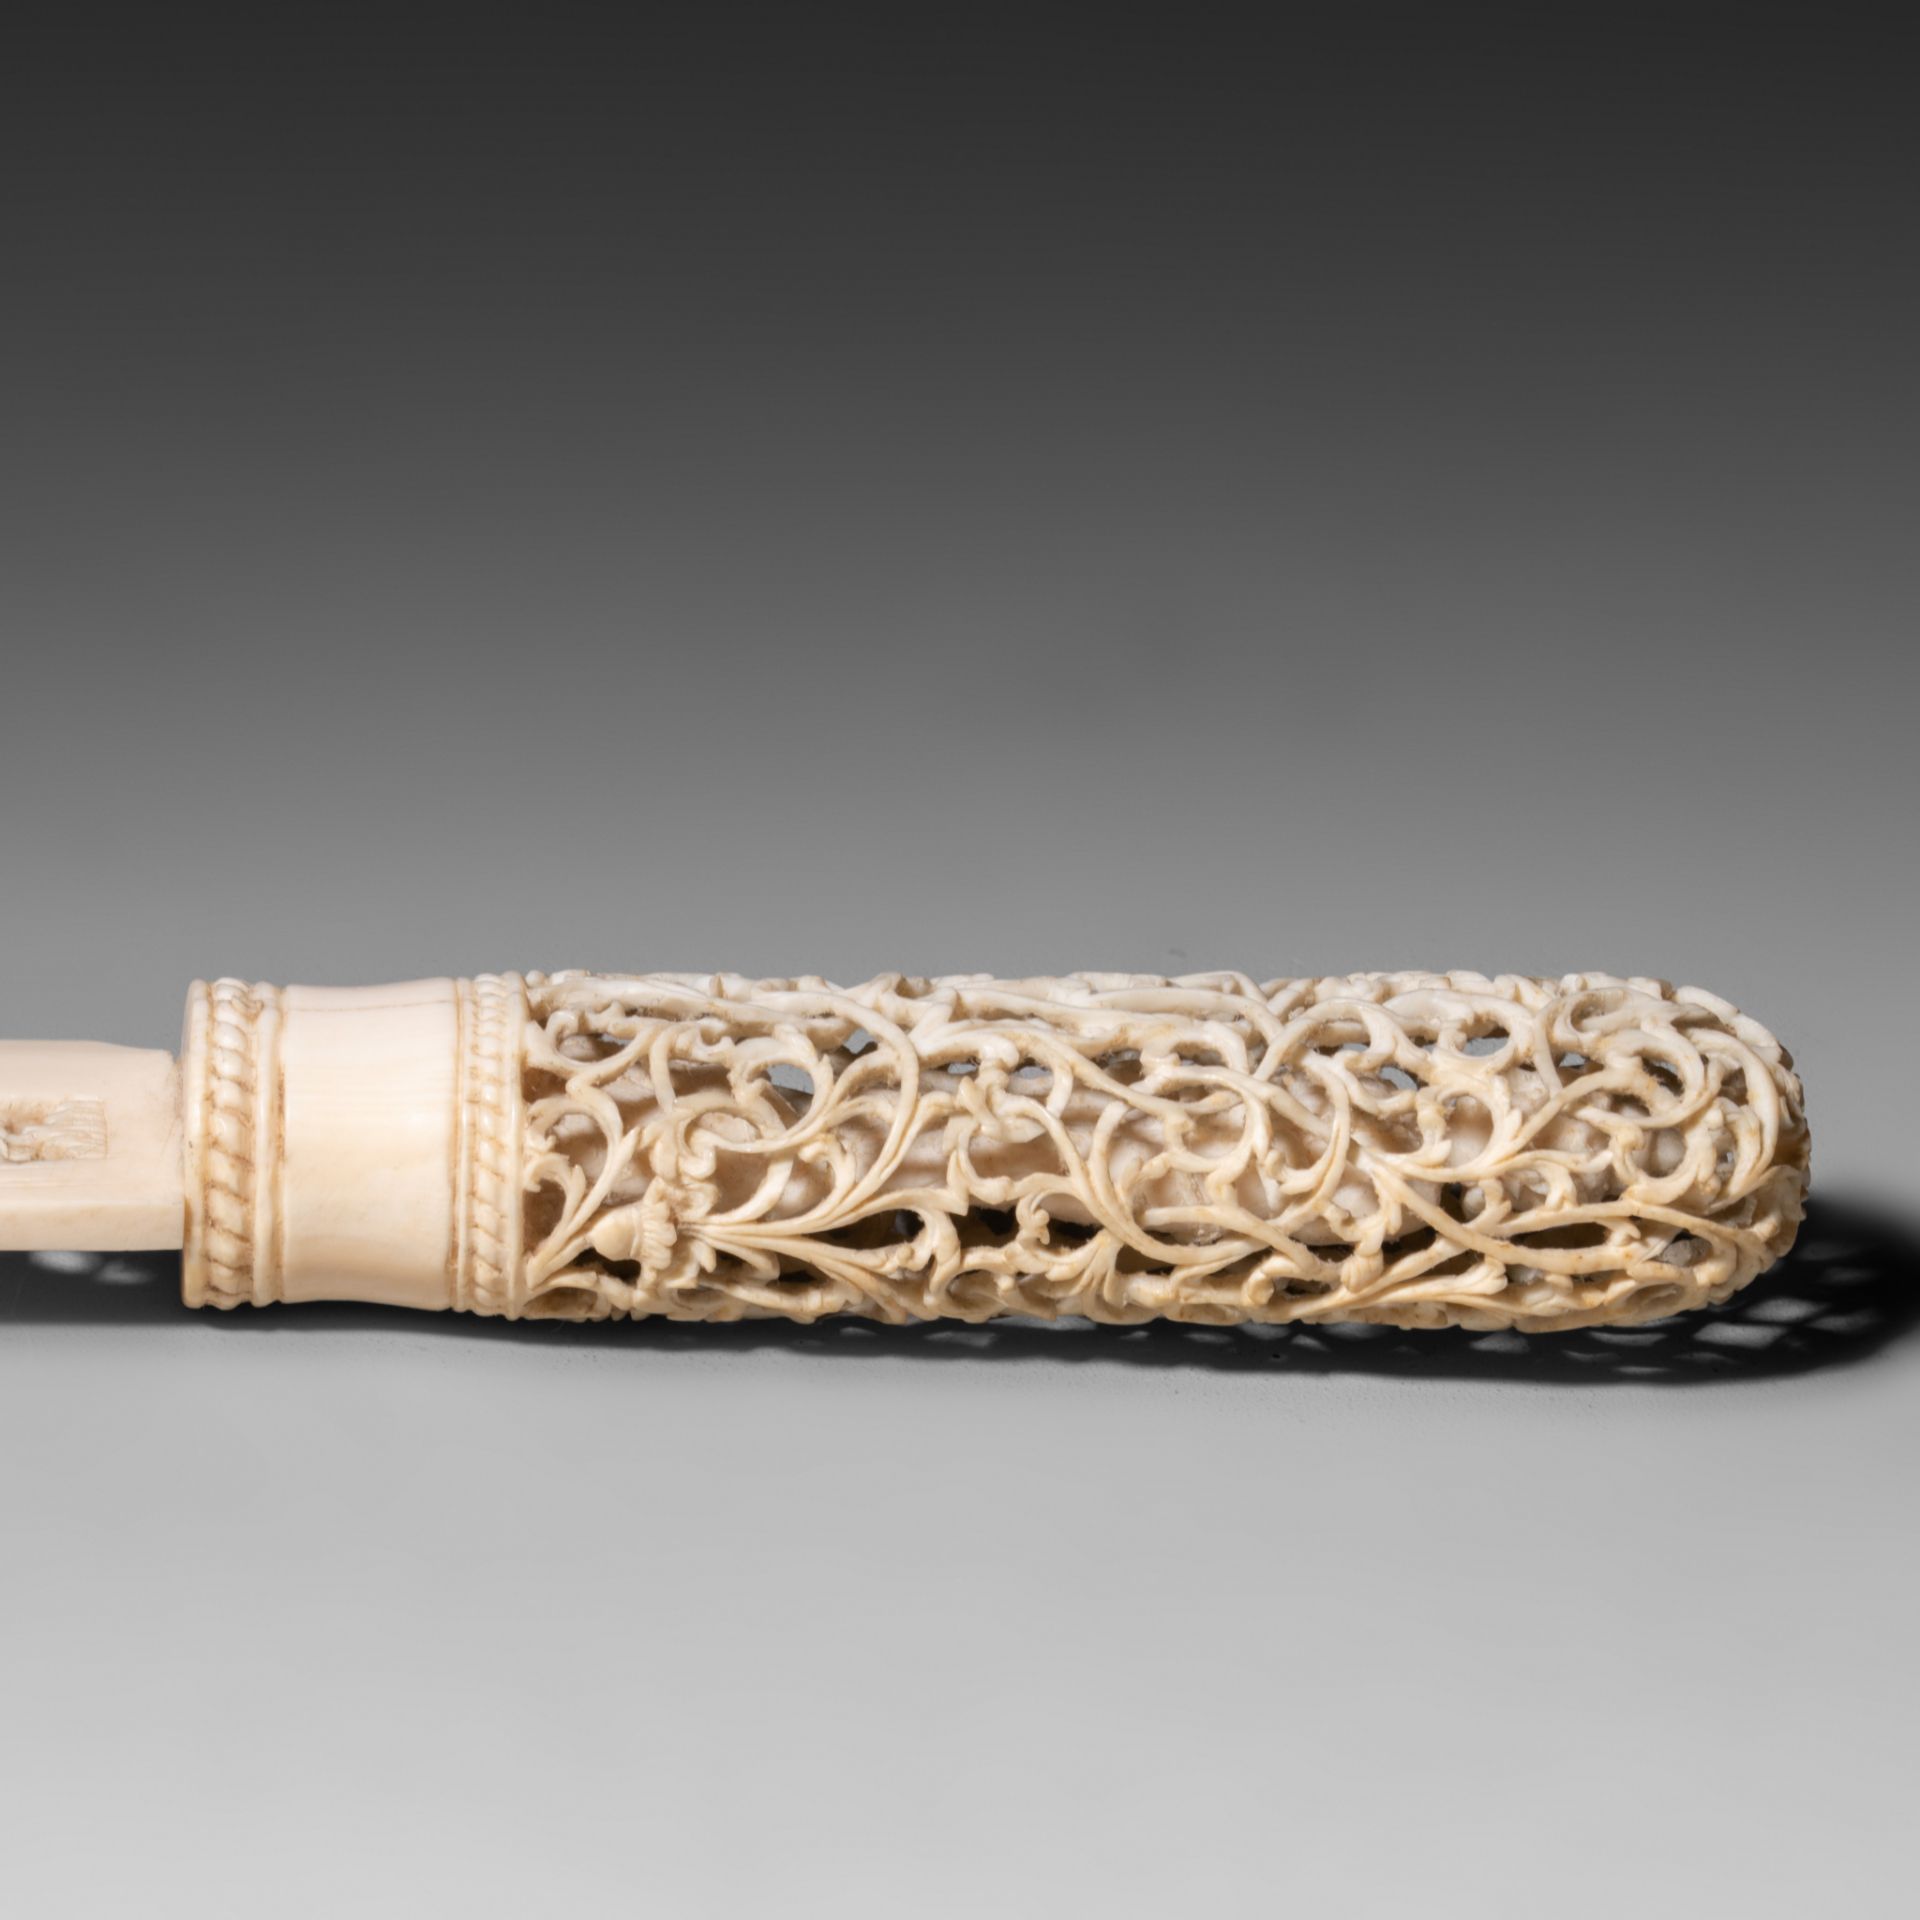 Two Burmese Colonial Ivory paperknives, L 51 cm - 200 g / L 35,8 cm - 80 g, both items are 19th or e - Bild 17 aus 18